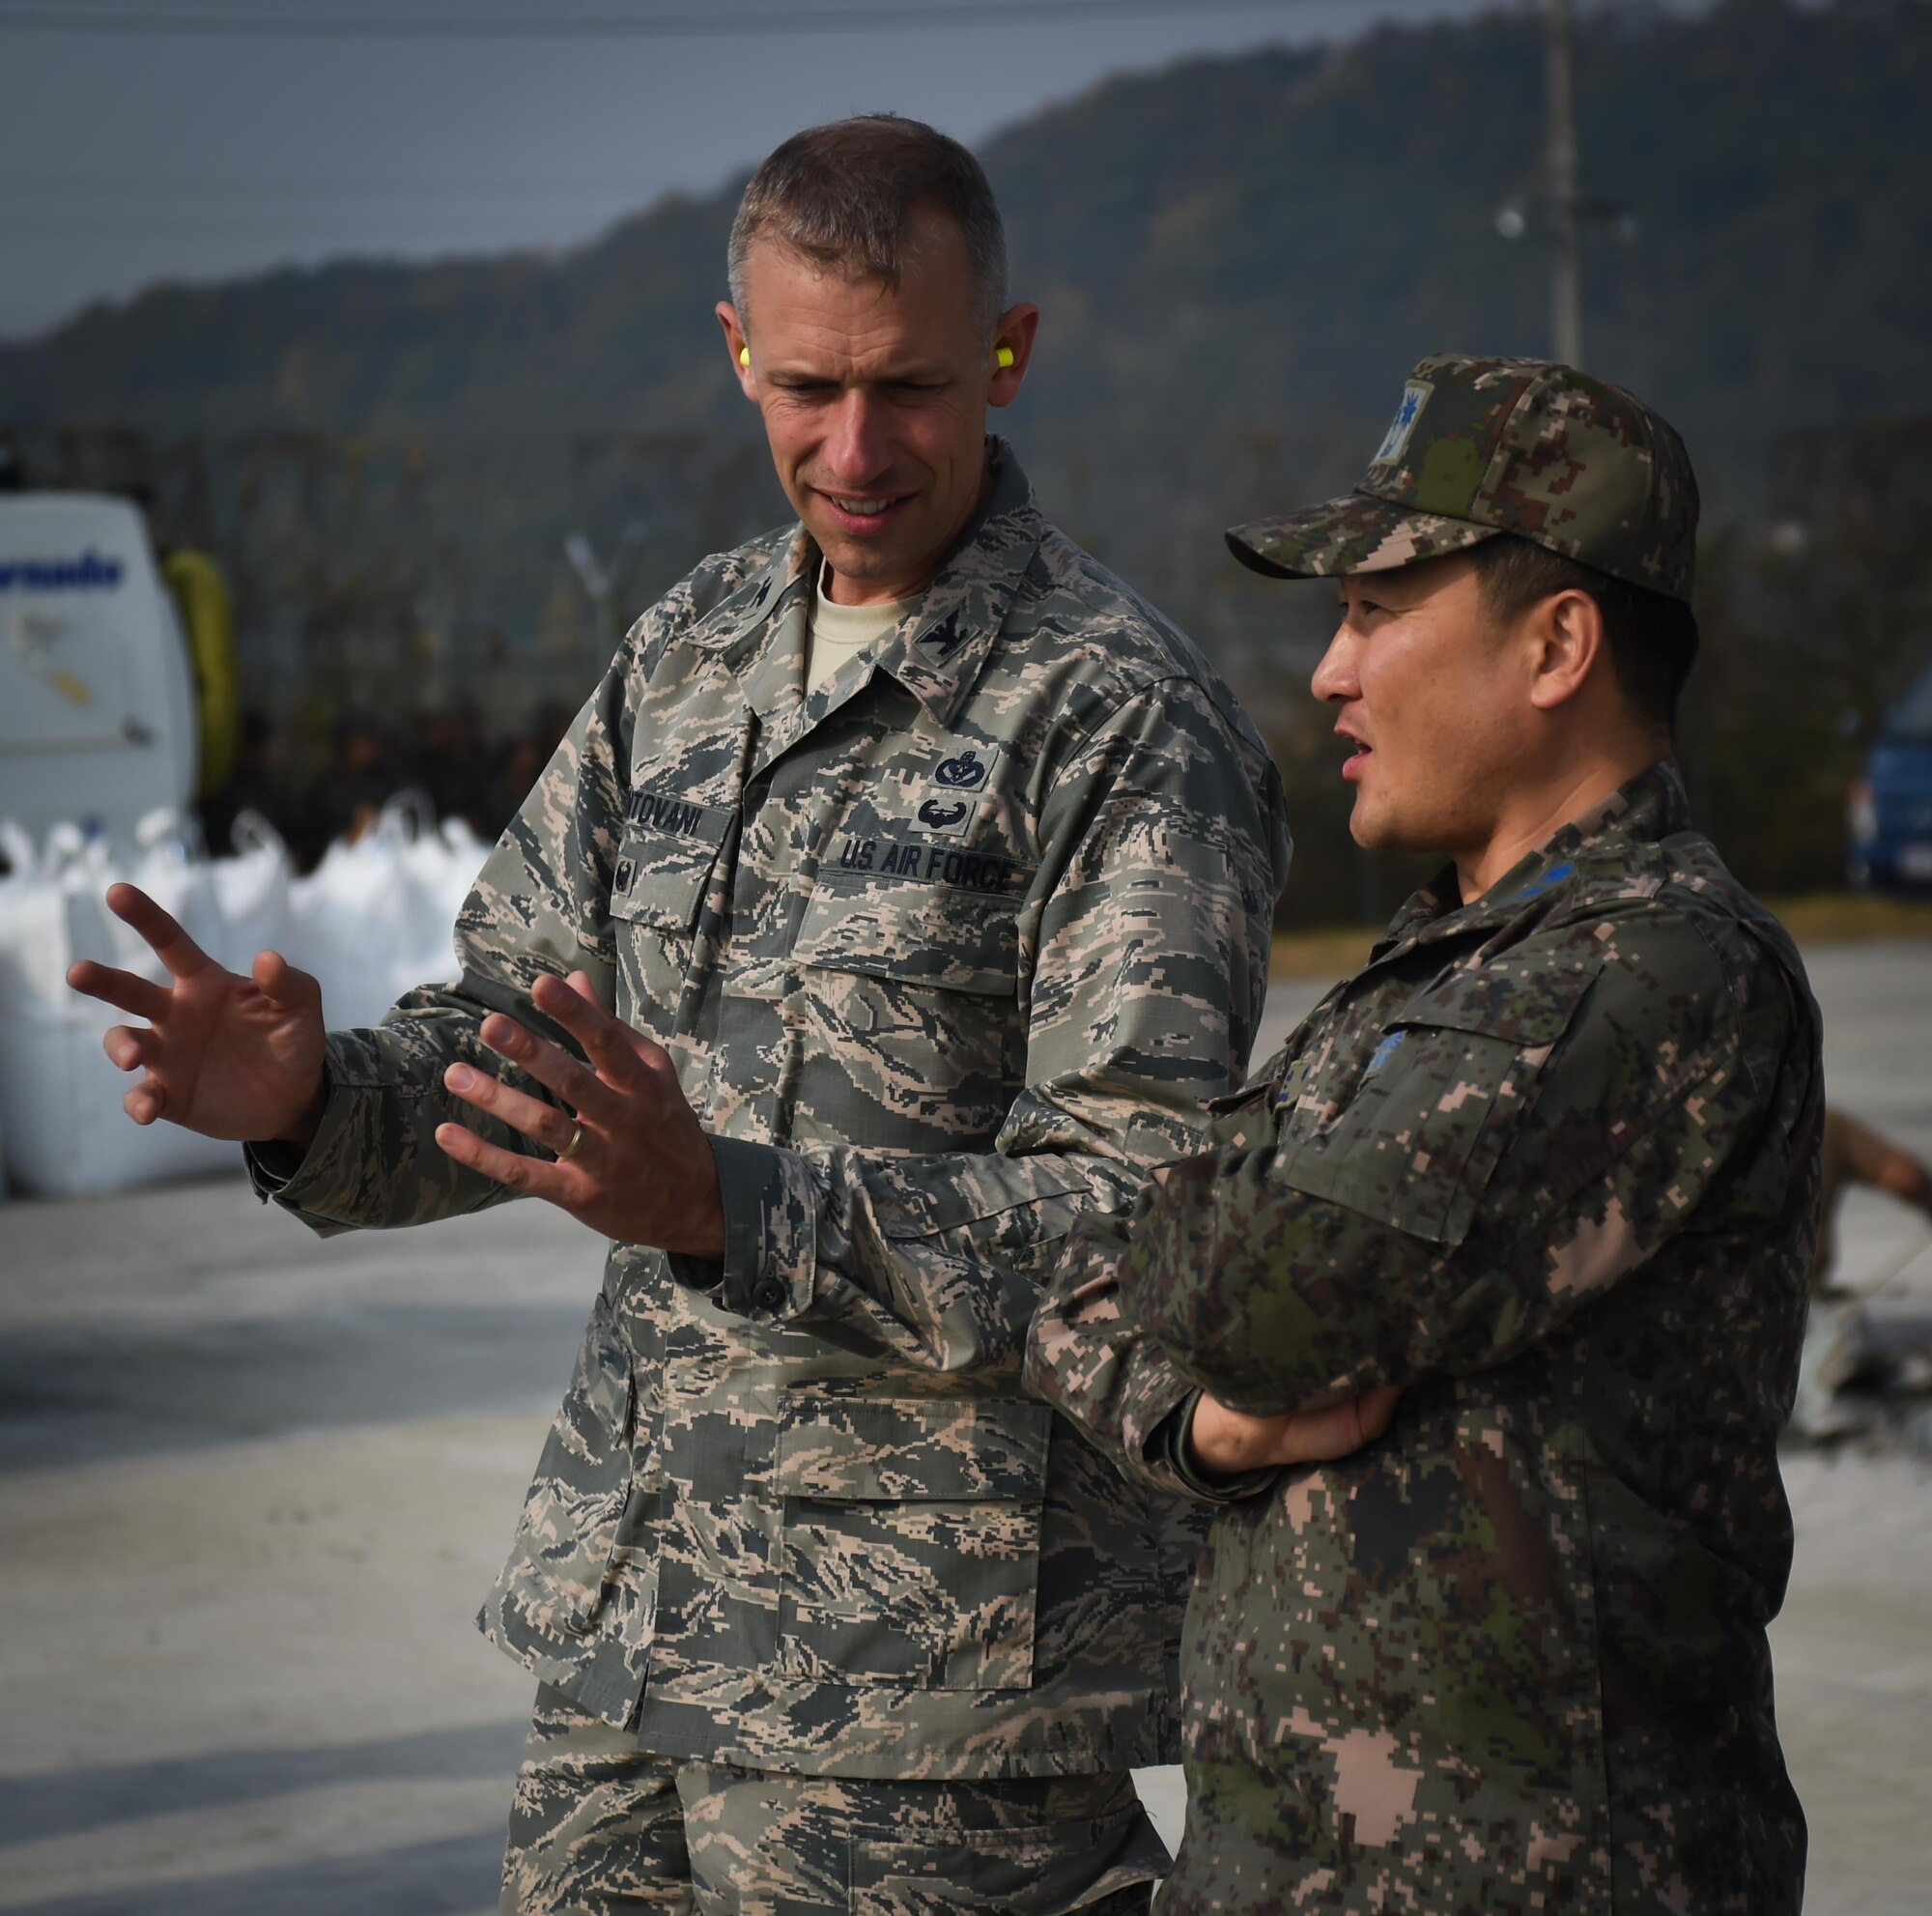 U.S. Air Force Col. Kevin Mantovani, 7th Air Force engineering division chief, and Republic of Korea Air Force Lt. Col. Injae Hwang, Air Force Operation and Command, share ideas during a Rapid Airfield Damage Repair bilateral training exercise at Gwangju Air Base, R.O.K., Nov. 8, 2017. U.S. and R.O.K. Airmen trained together for a week to learn the new RADR process, preparing them for response to wartime contingencies, enhancing interoperability and building partnership capacity in the Indo-Asia Pacific region. (U.S. Air Force photo by Senior Airman Curt Beach)